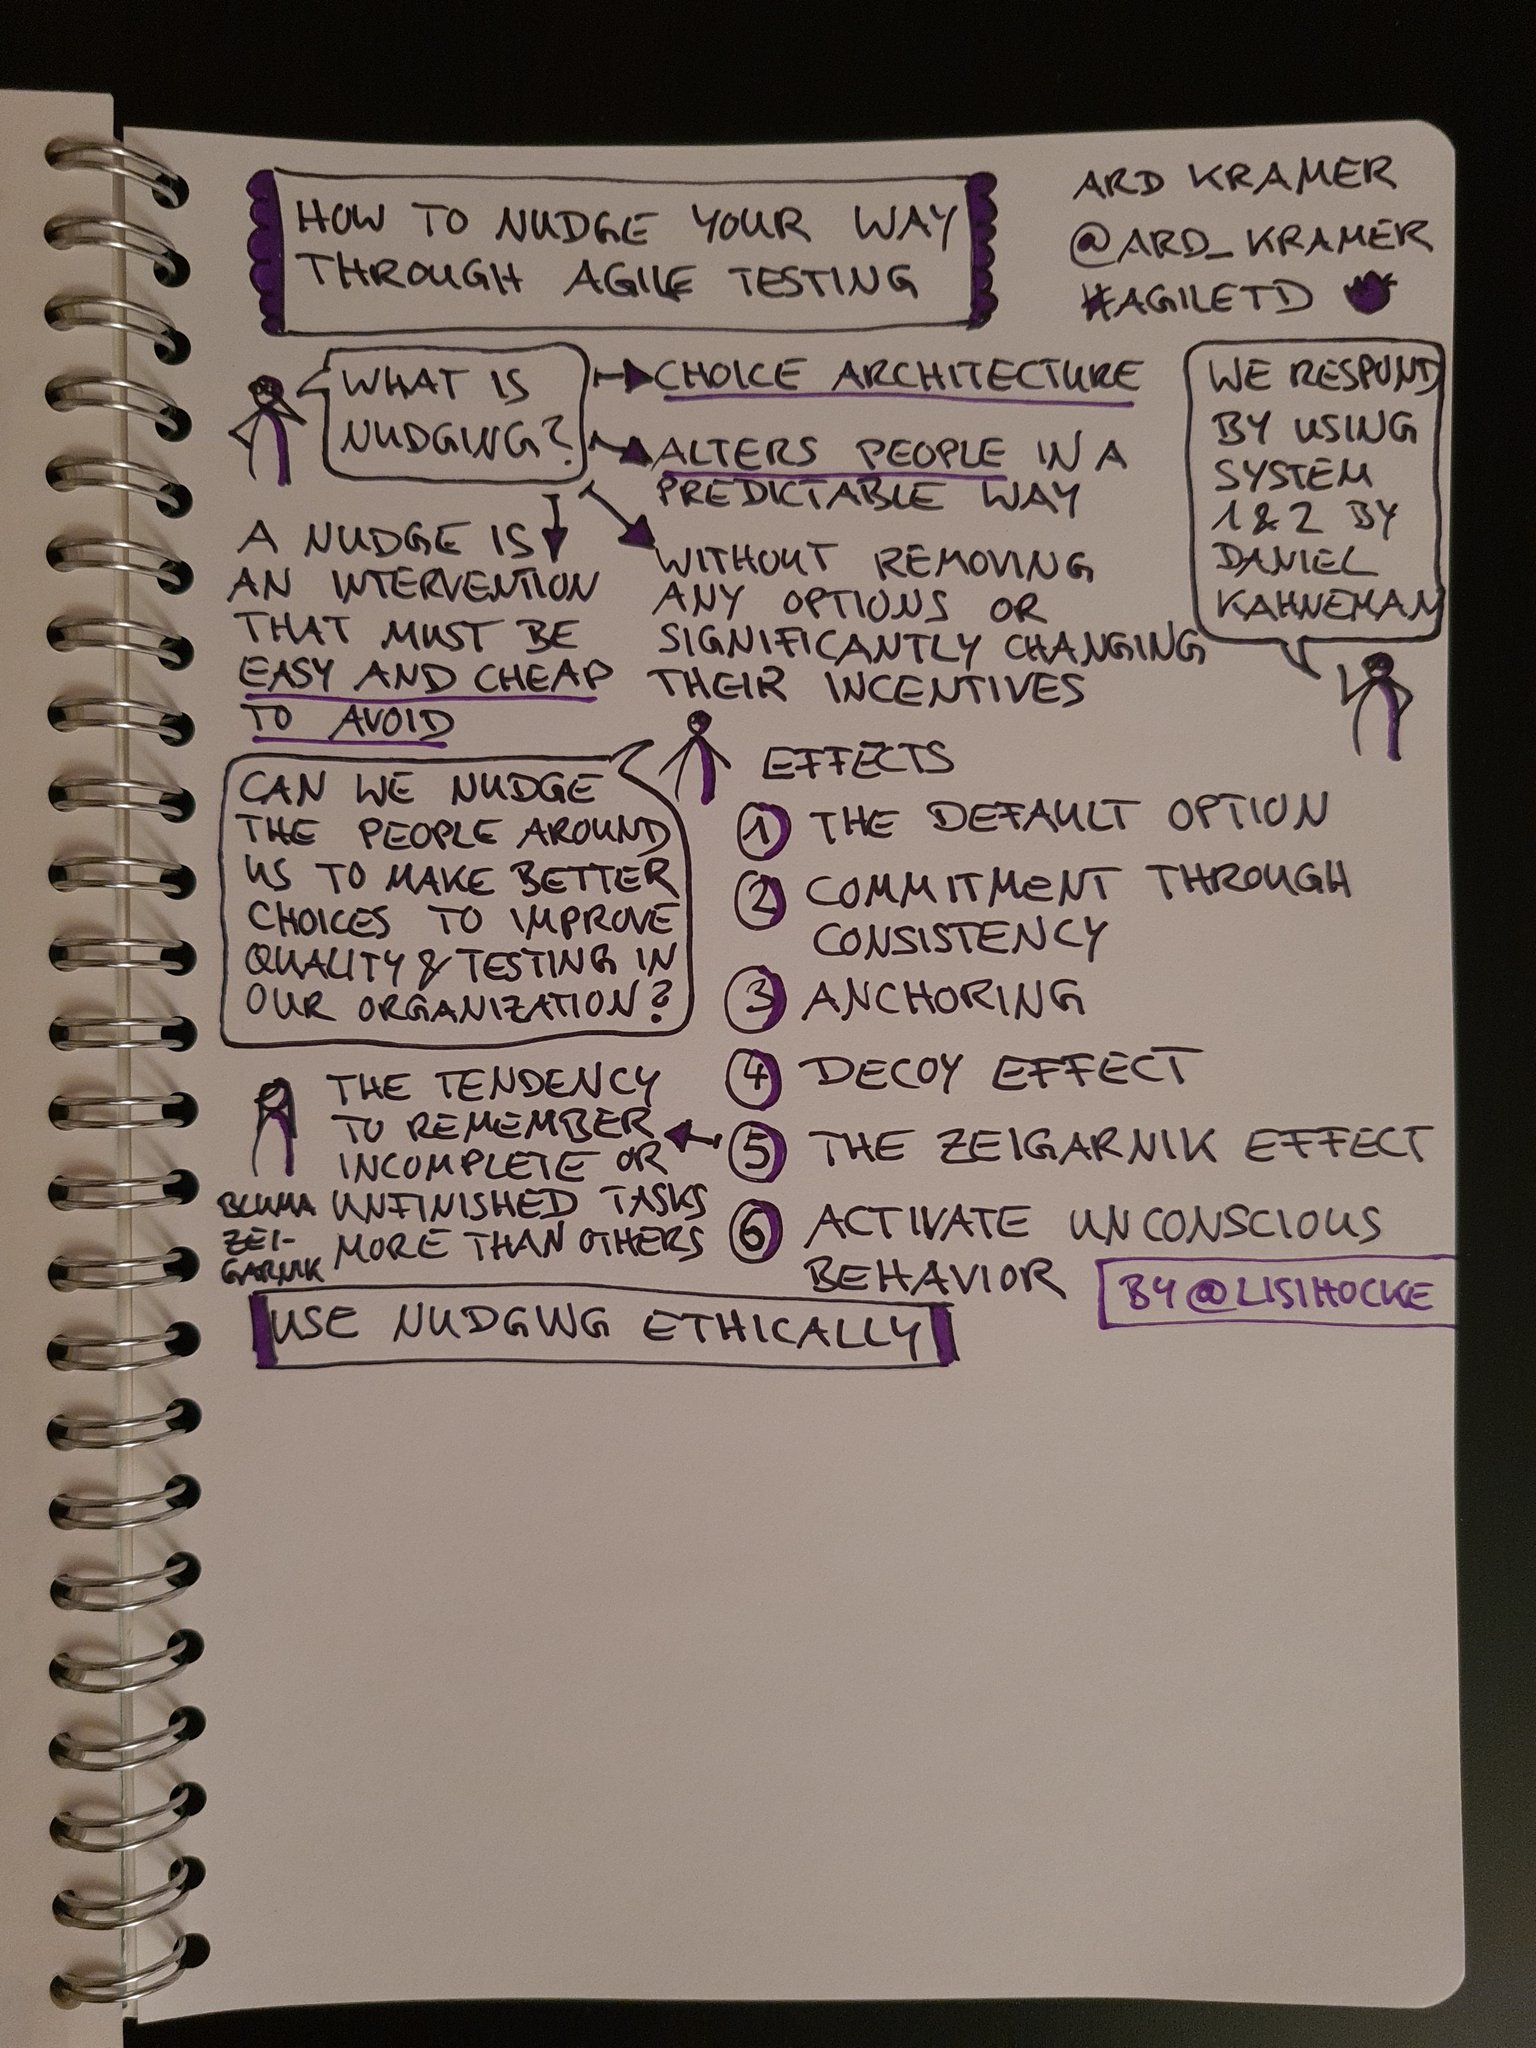 Sketchnote of the Agile Testing Days 2021 keynote "How to nudge your way through agile testing" by Ard Kramer